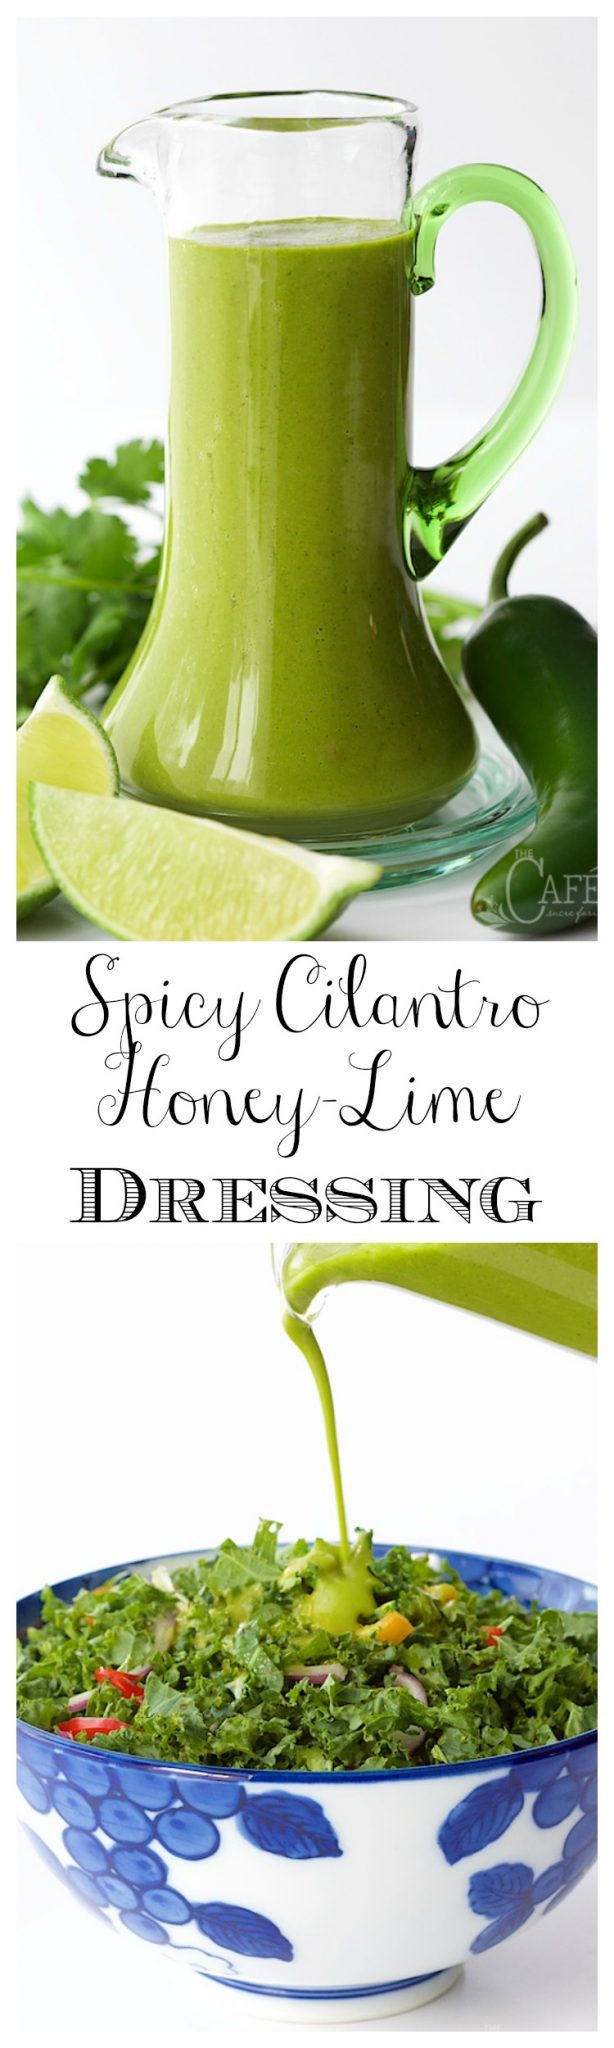 Spicy Cilantro Honey-Lime Dressing - addictively delicious, this dressing will rock your little salad loving world!